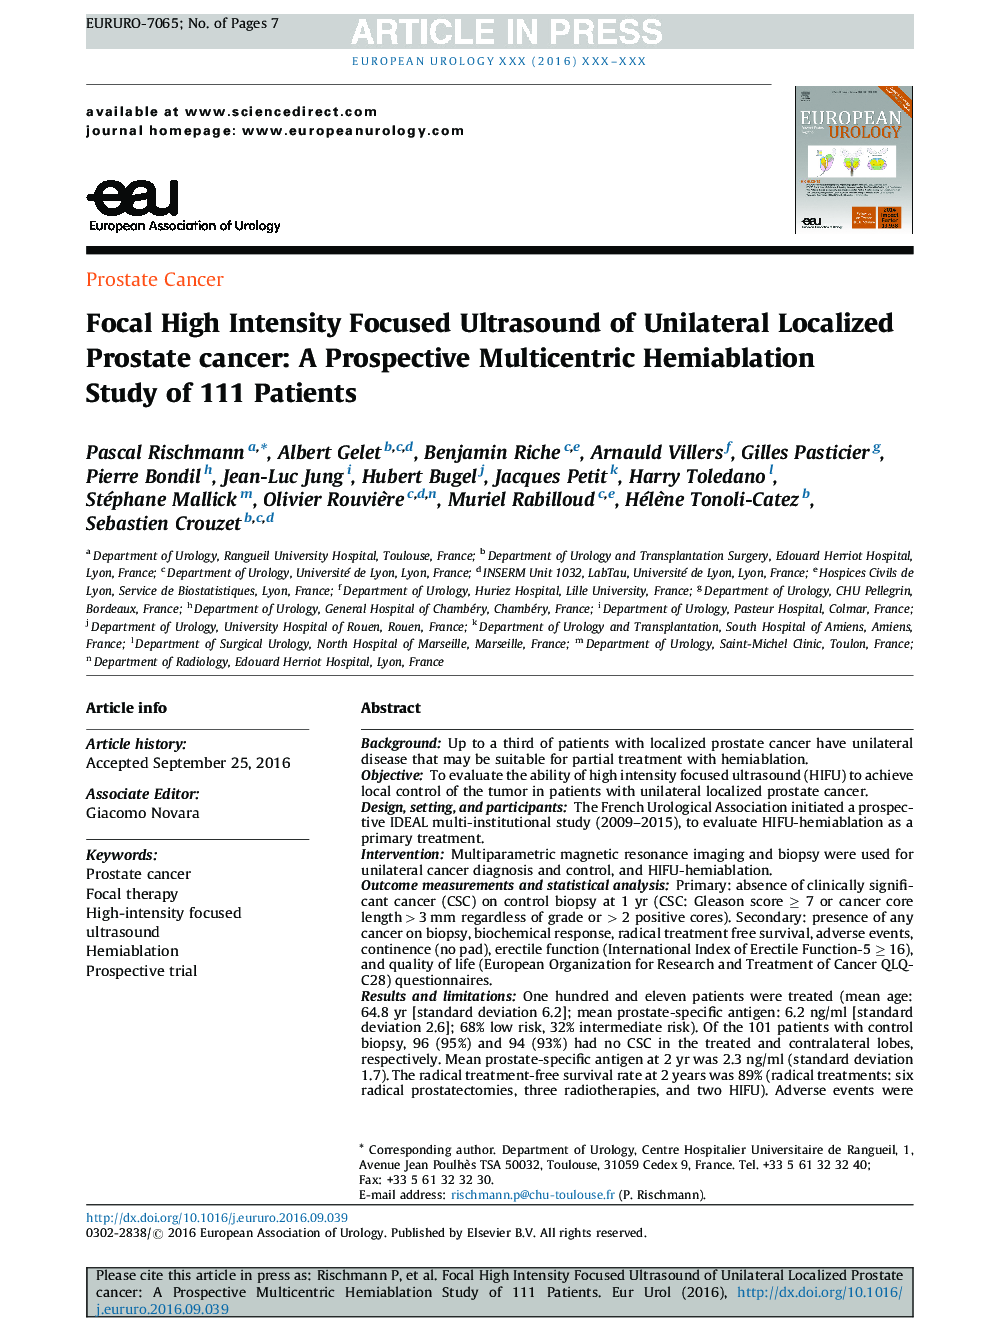 Focal High Intensity Focused Ultrasound of Unilateral Localized Prostate Cancer: A Prospective Multicentric Hemiablation Study of 111 Patients